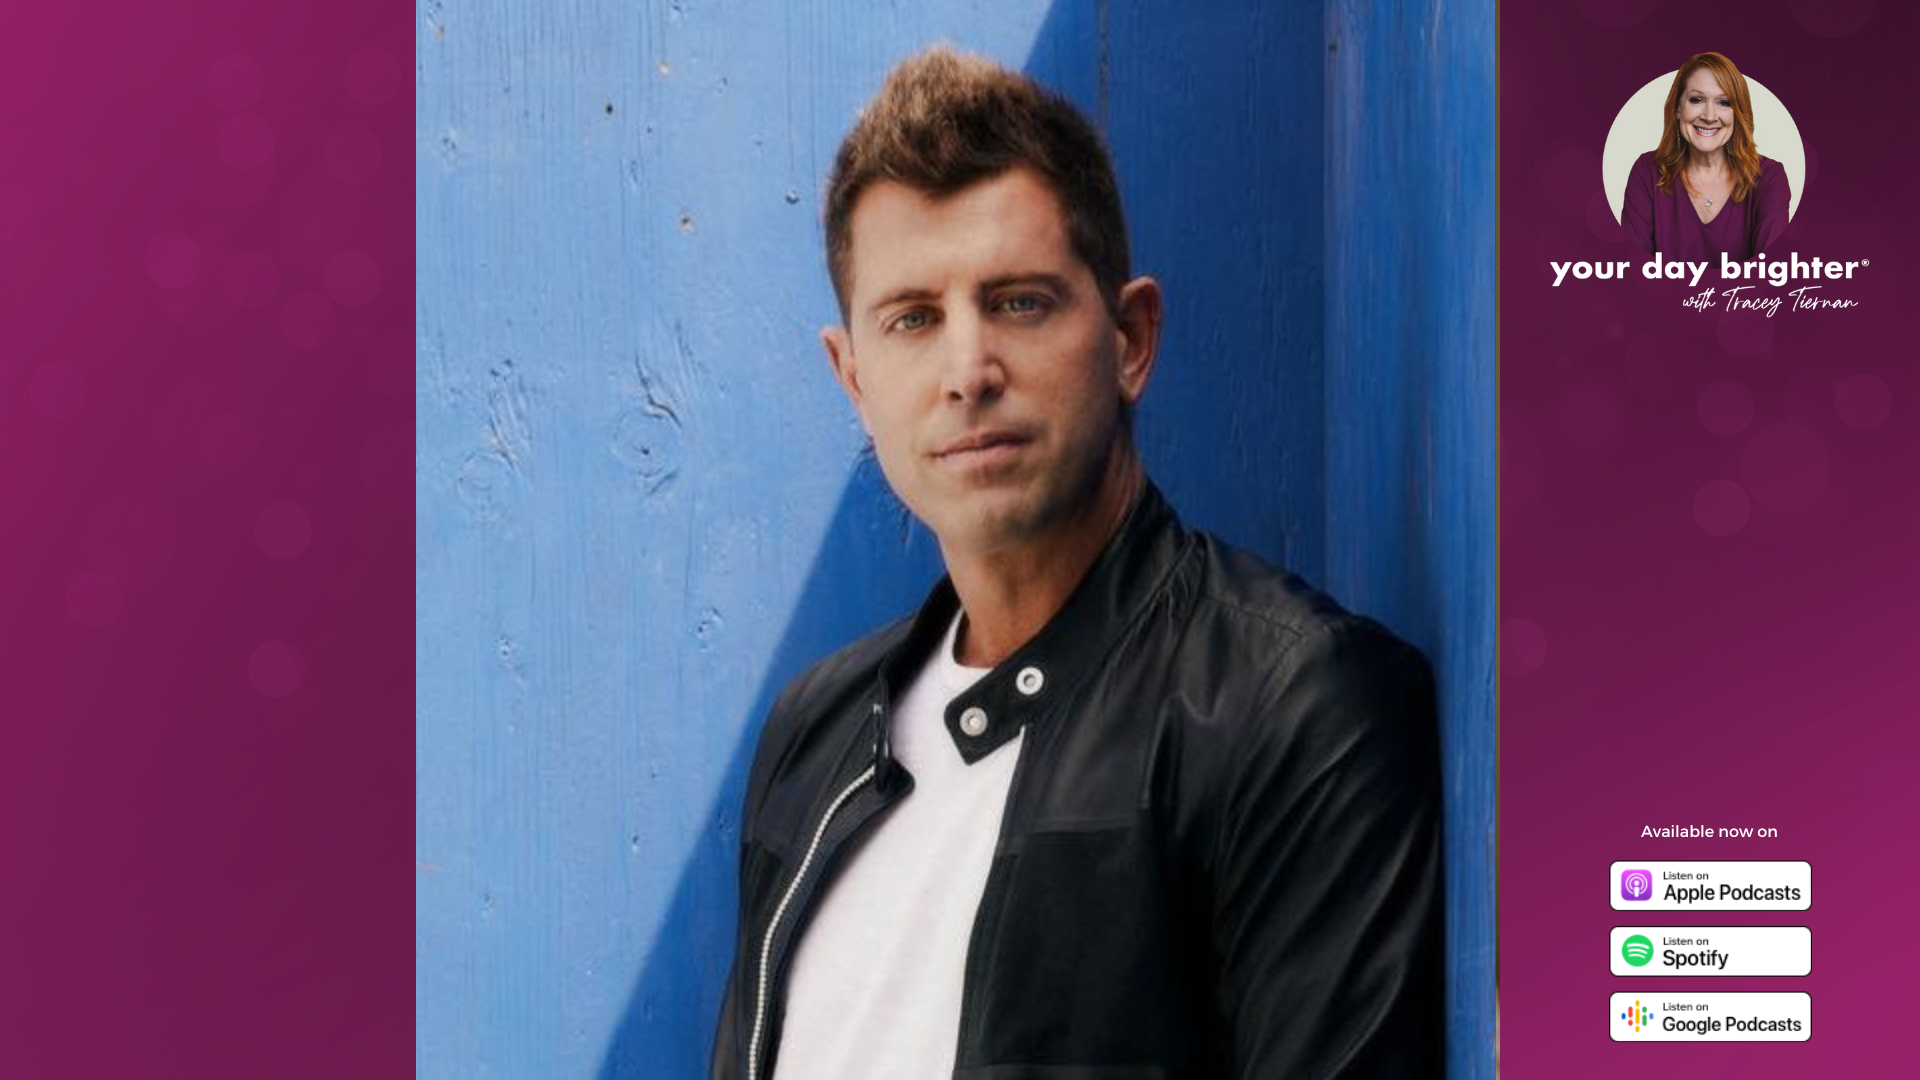 Jeremy Camp in a leather jacket and a white t-shirt posing against a blue wall